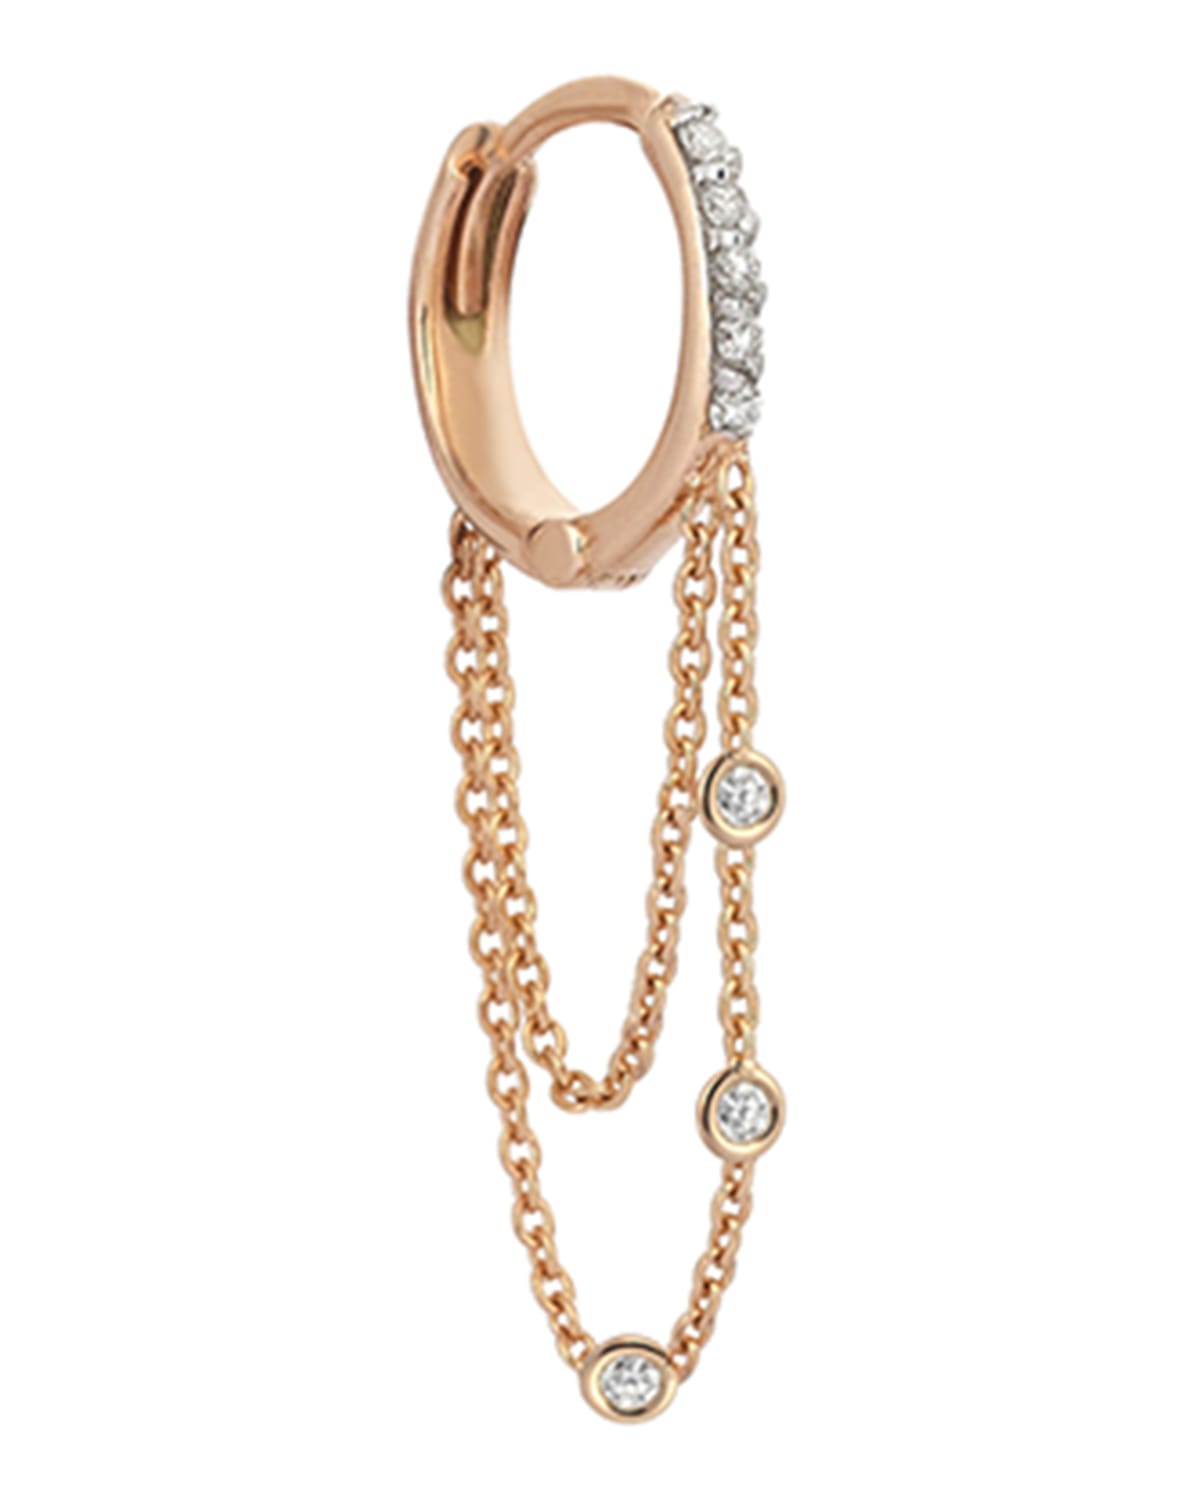 Colors 14K Rose Gold Triple-Chain Hoop Earring with Champagne Diamonds